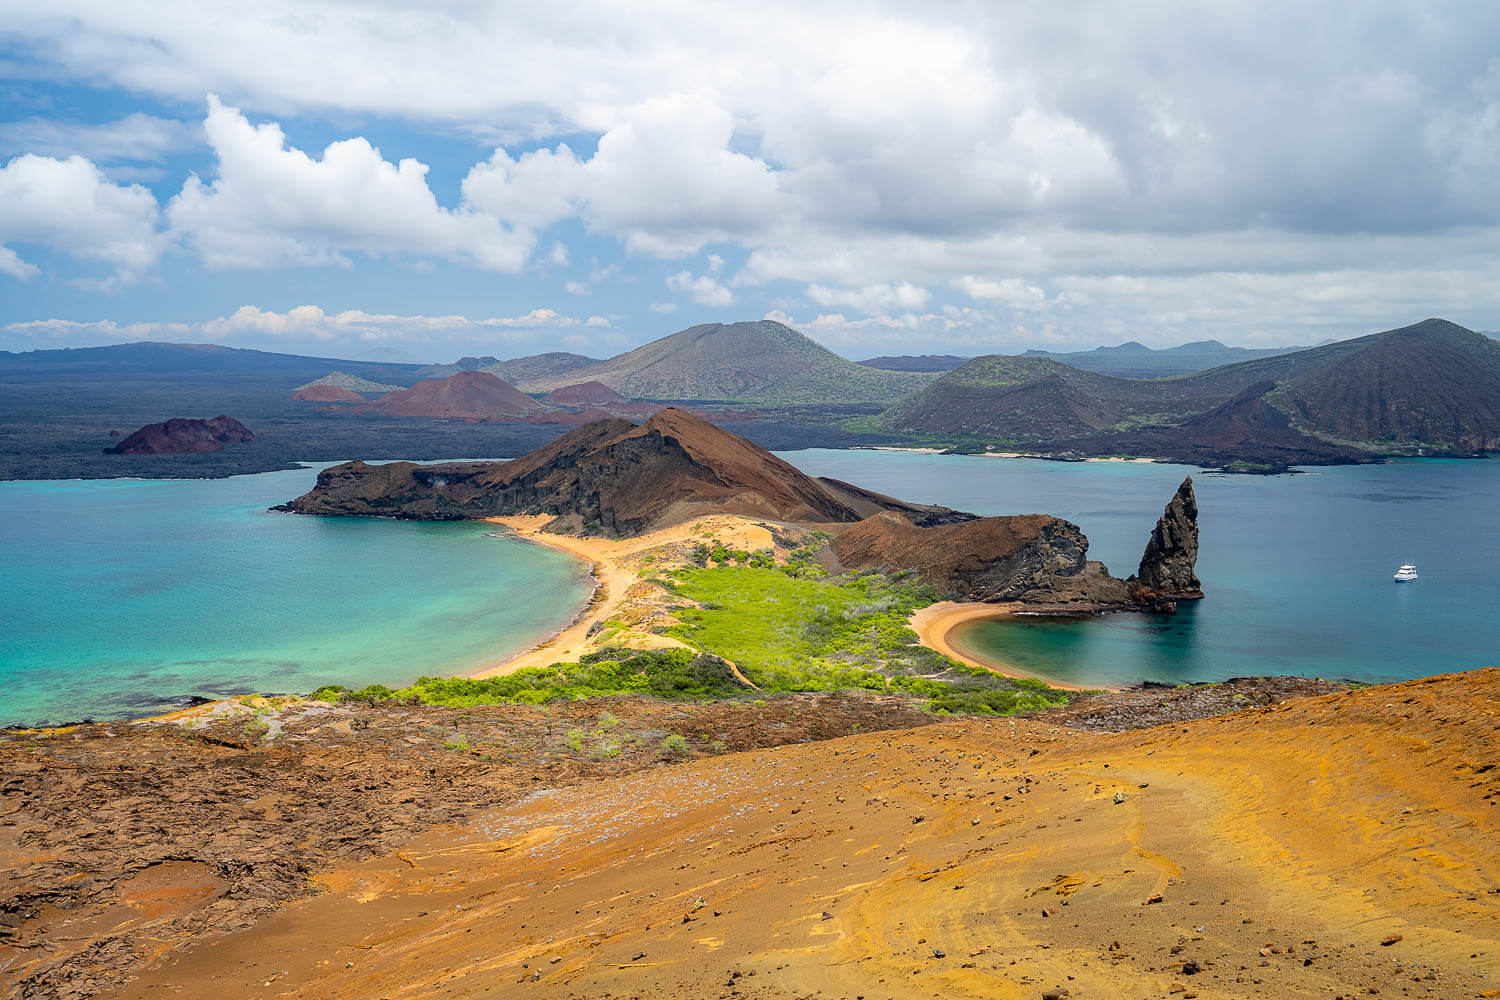 The viewpoint at Bartolome Island, one of the best Galápagos Islands tours and one of the best beaches.